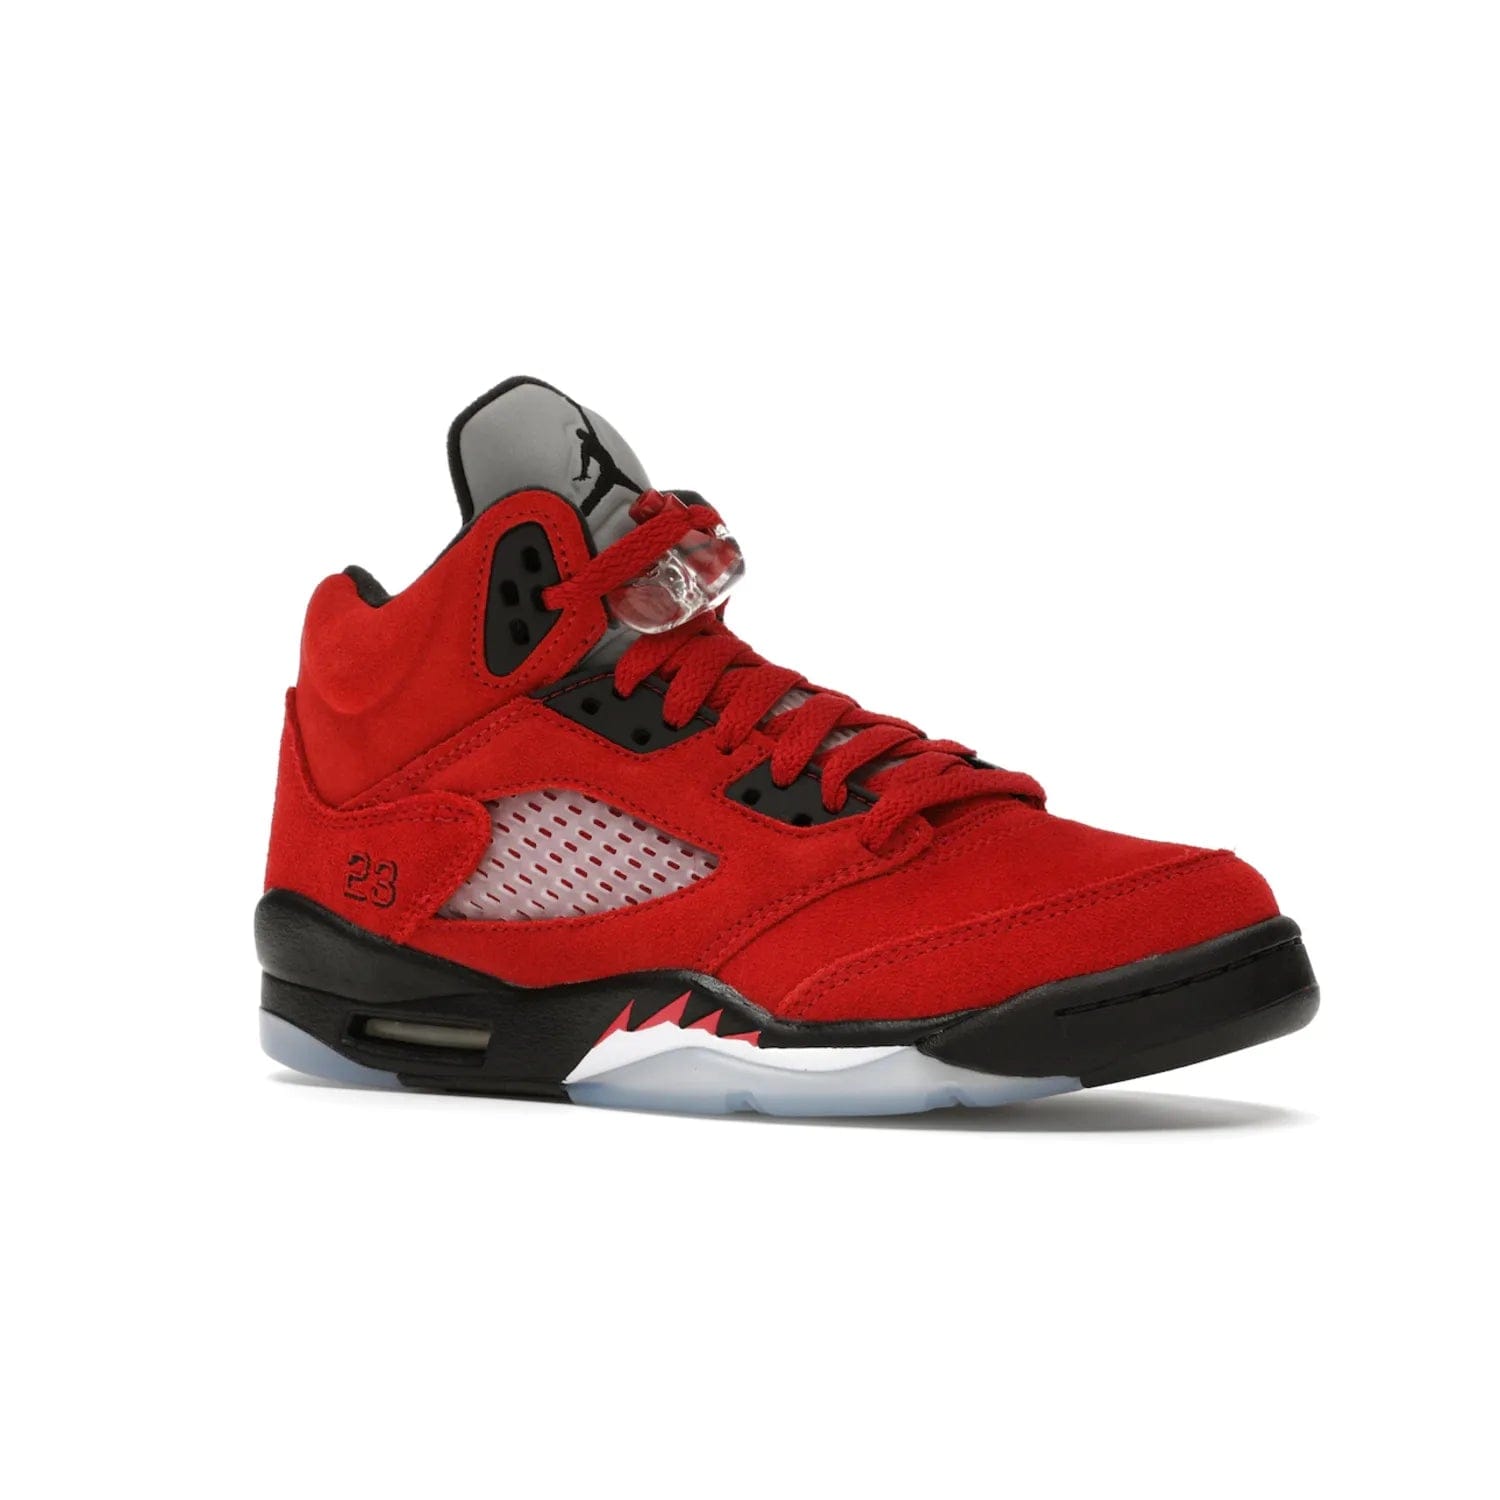 Jordan 5 Retro Raging Bull Red (2021) (GS) - Image 4 - Only at www.BallersClubKickz.com - Jordan 5 Retro Raging Bulls Red 2021 GS. Varsity Red suede upper with embroidered number 23, black leather detail, red laces, and midsole with air cushioning. Jumpman logos on tongue, heel, and outsole. On-trend streetwear and basketball style. Released April 10, 2021.